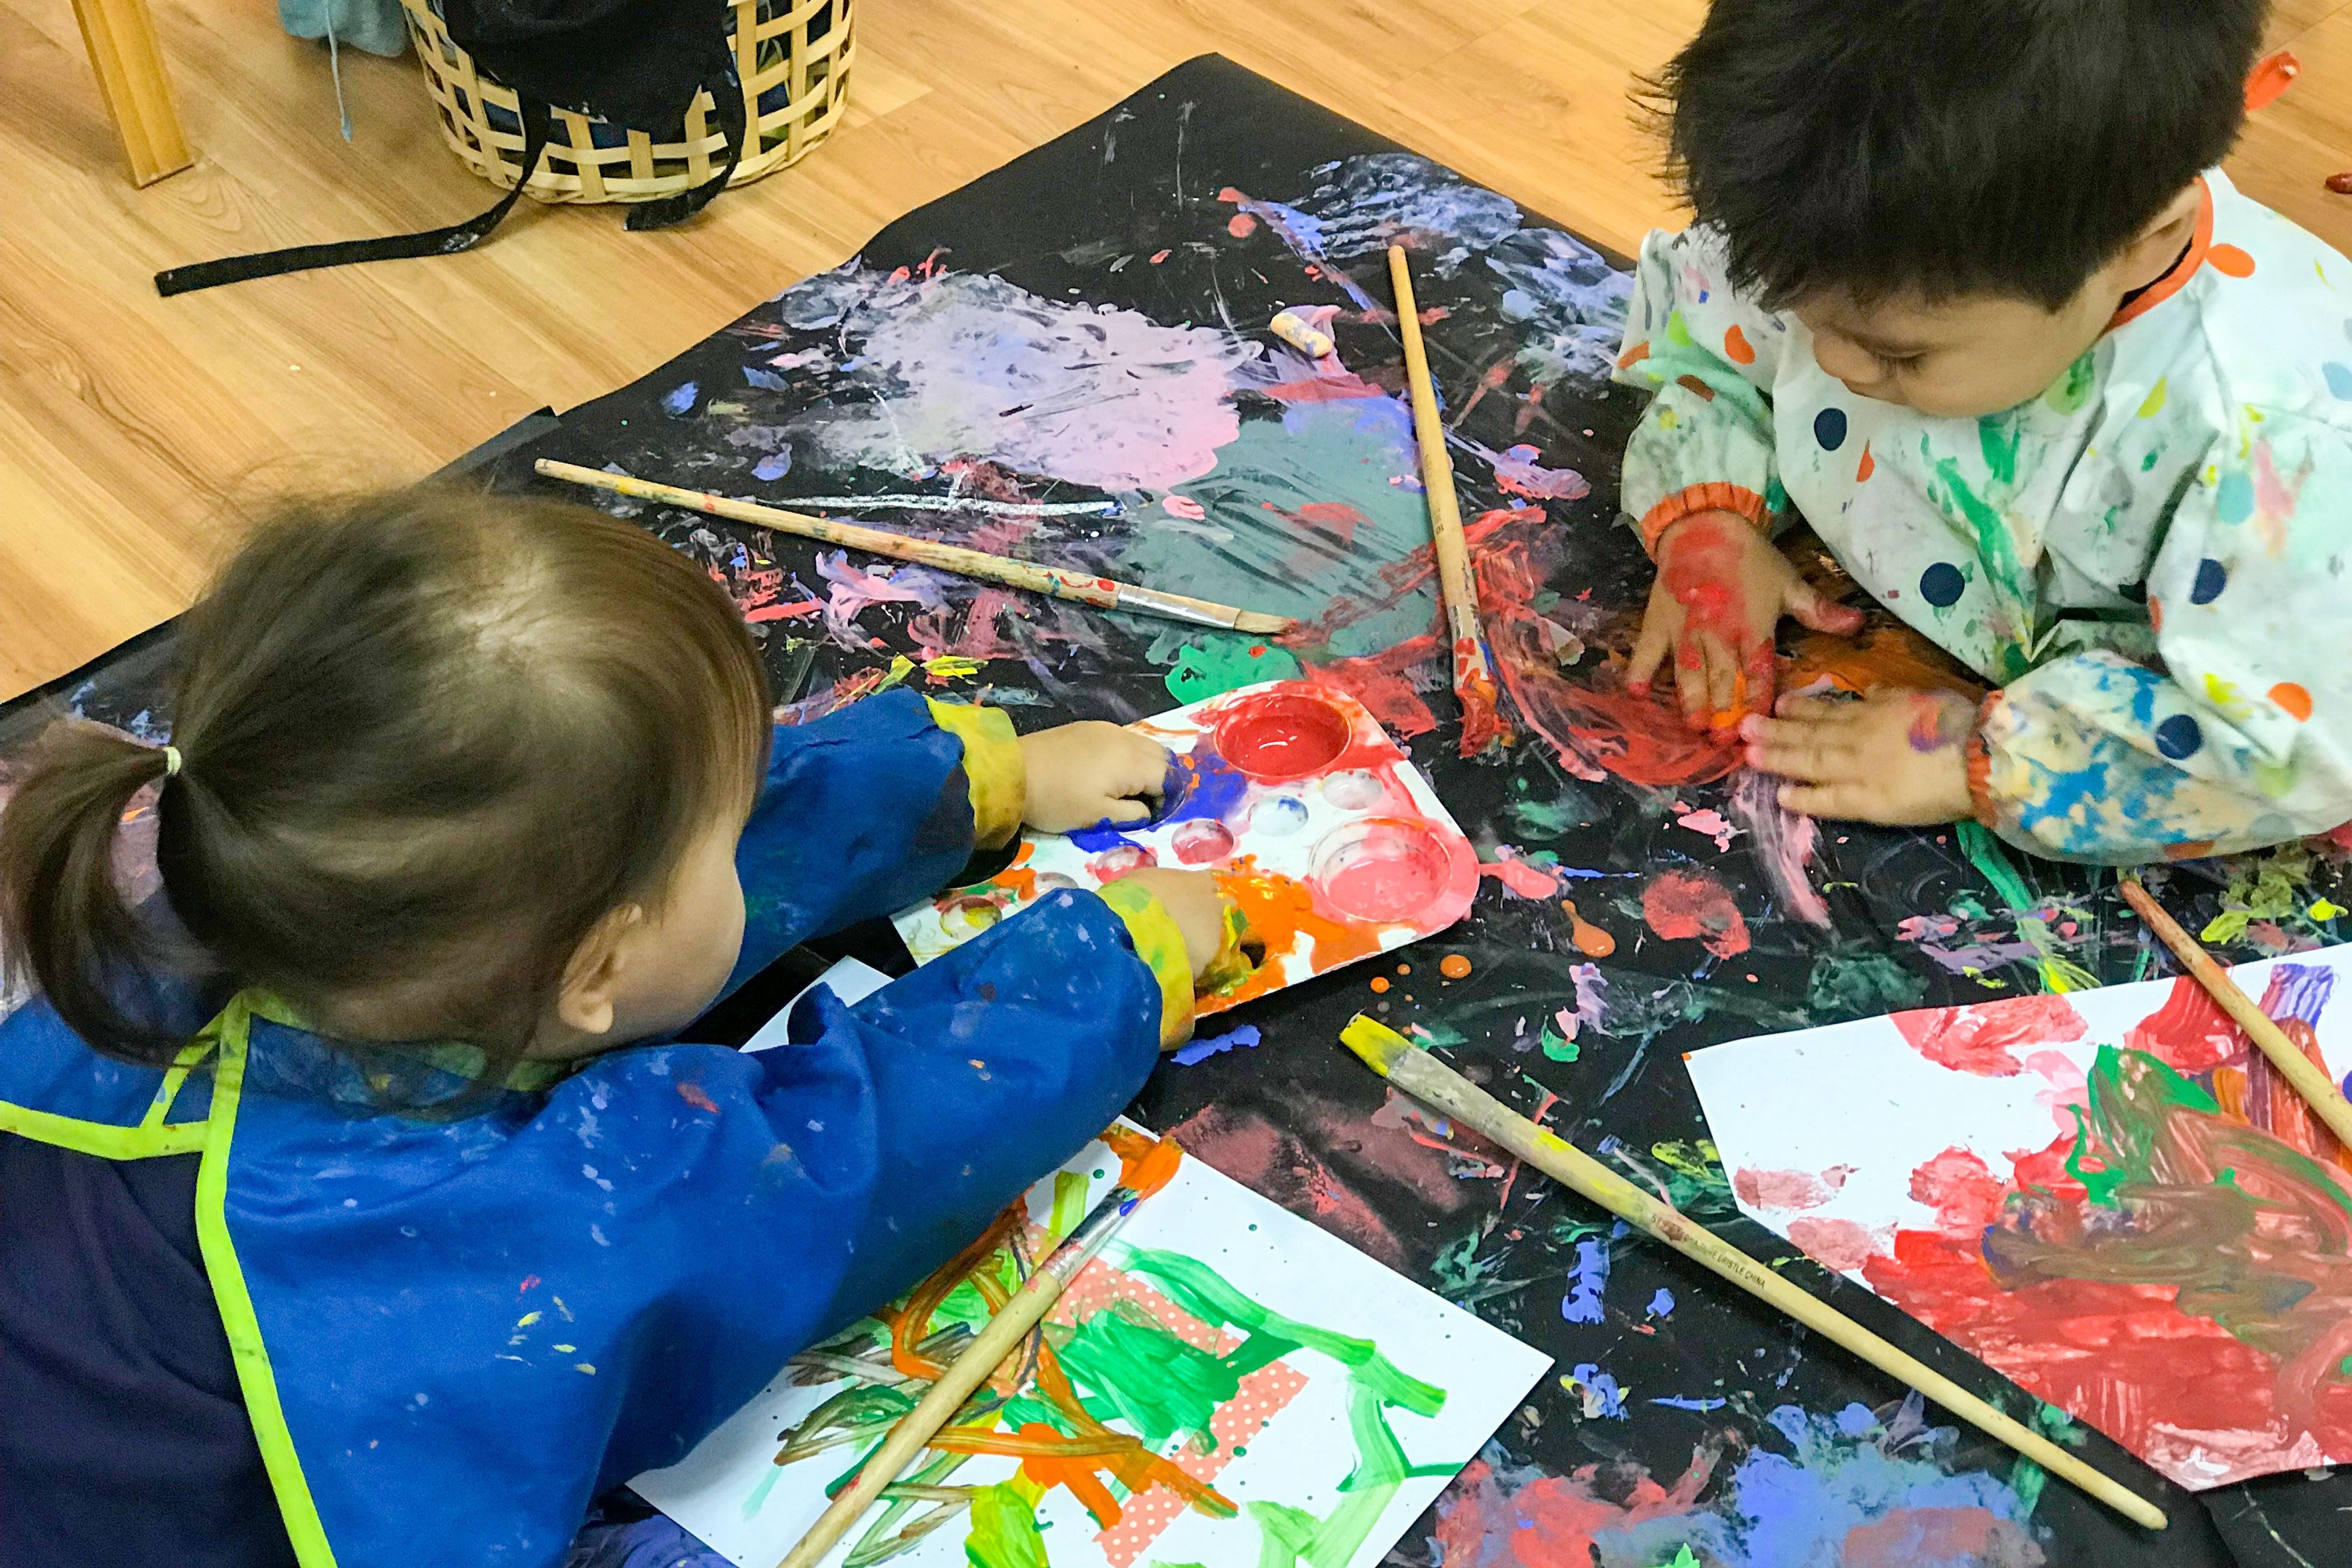 6 Activities for Creative Expression